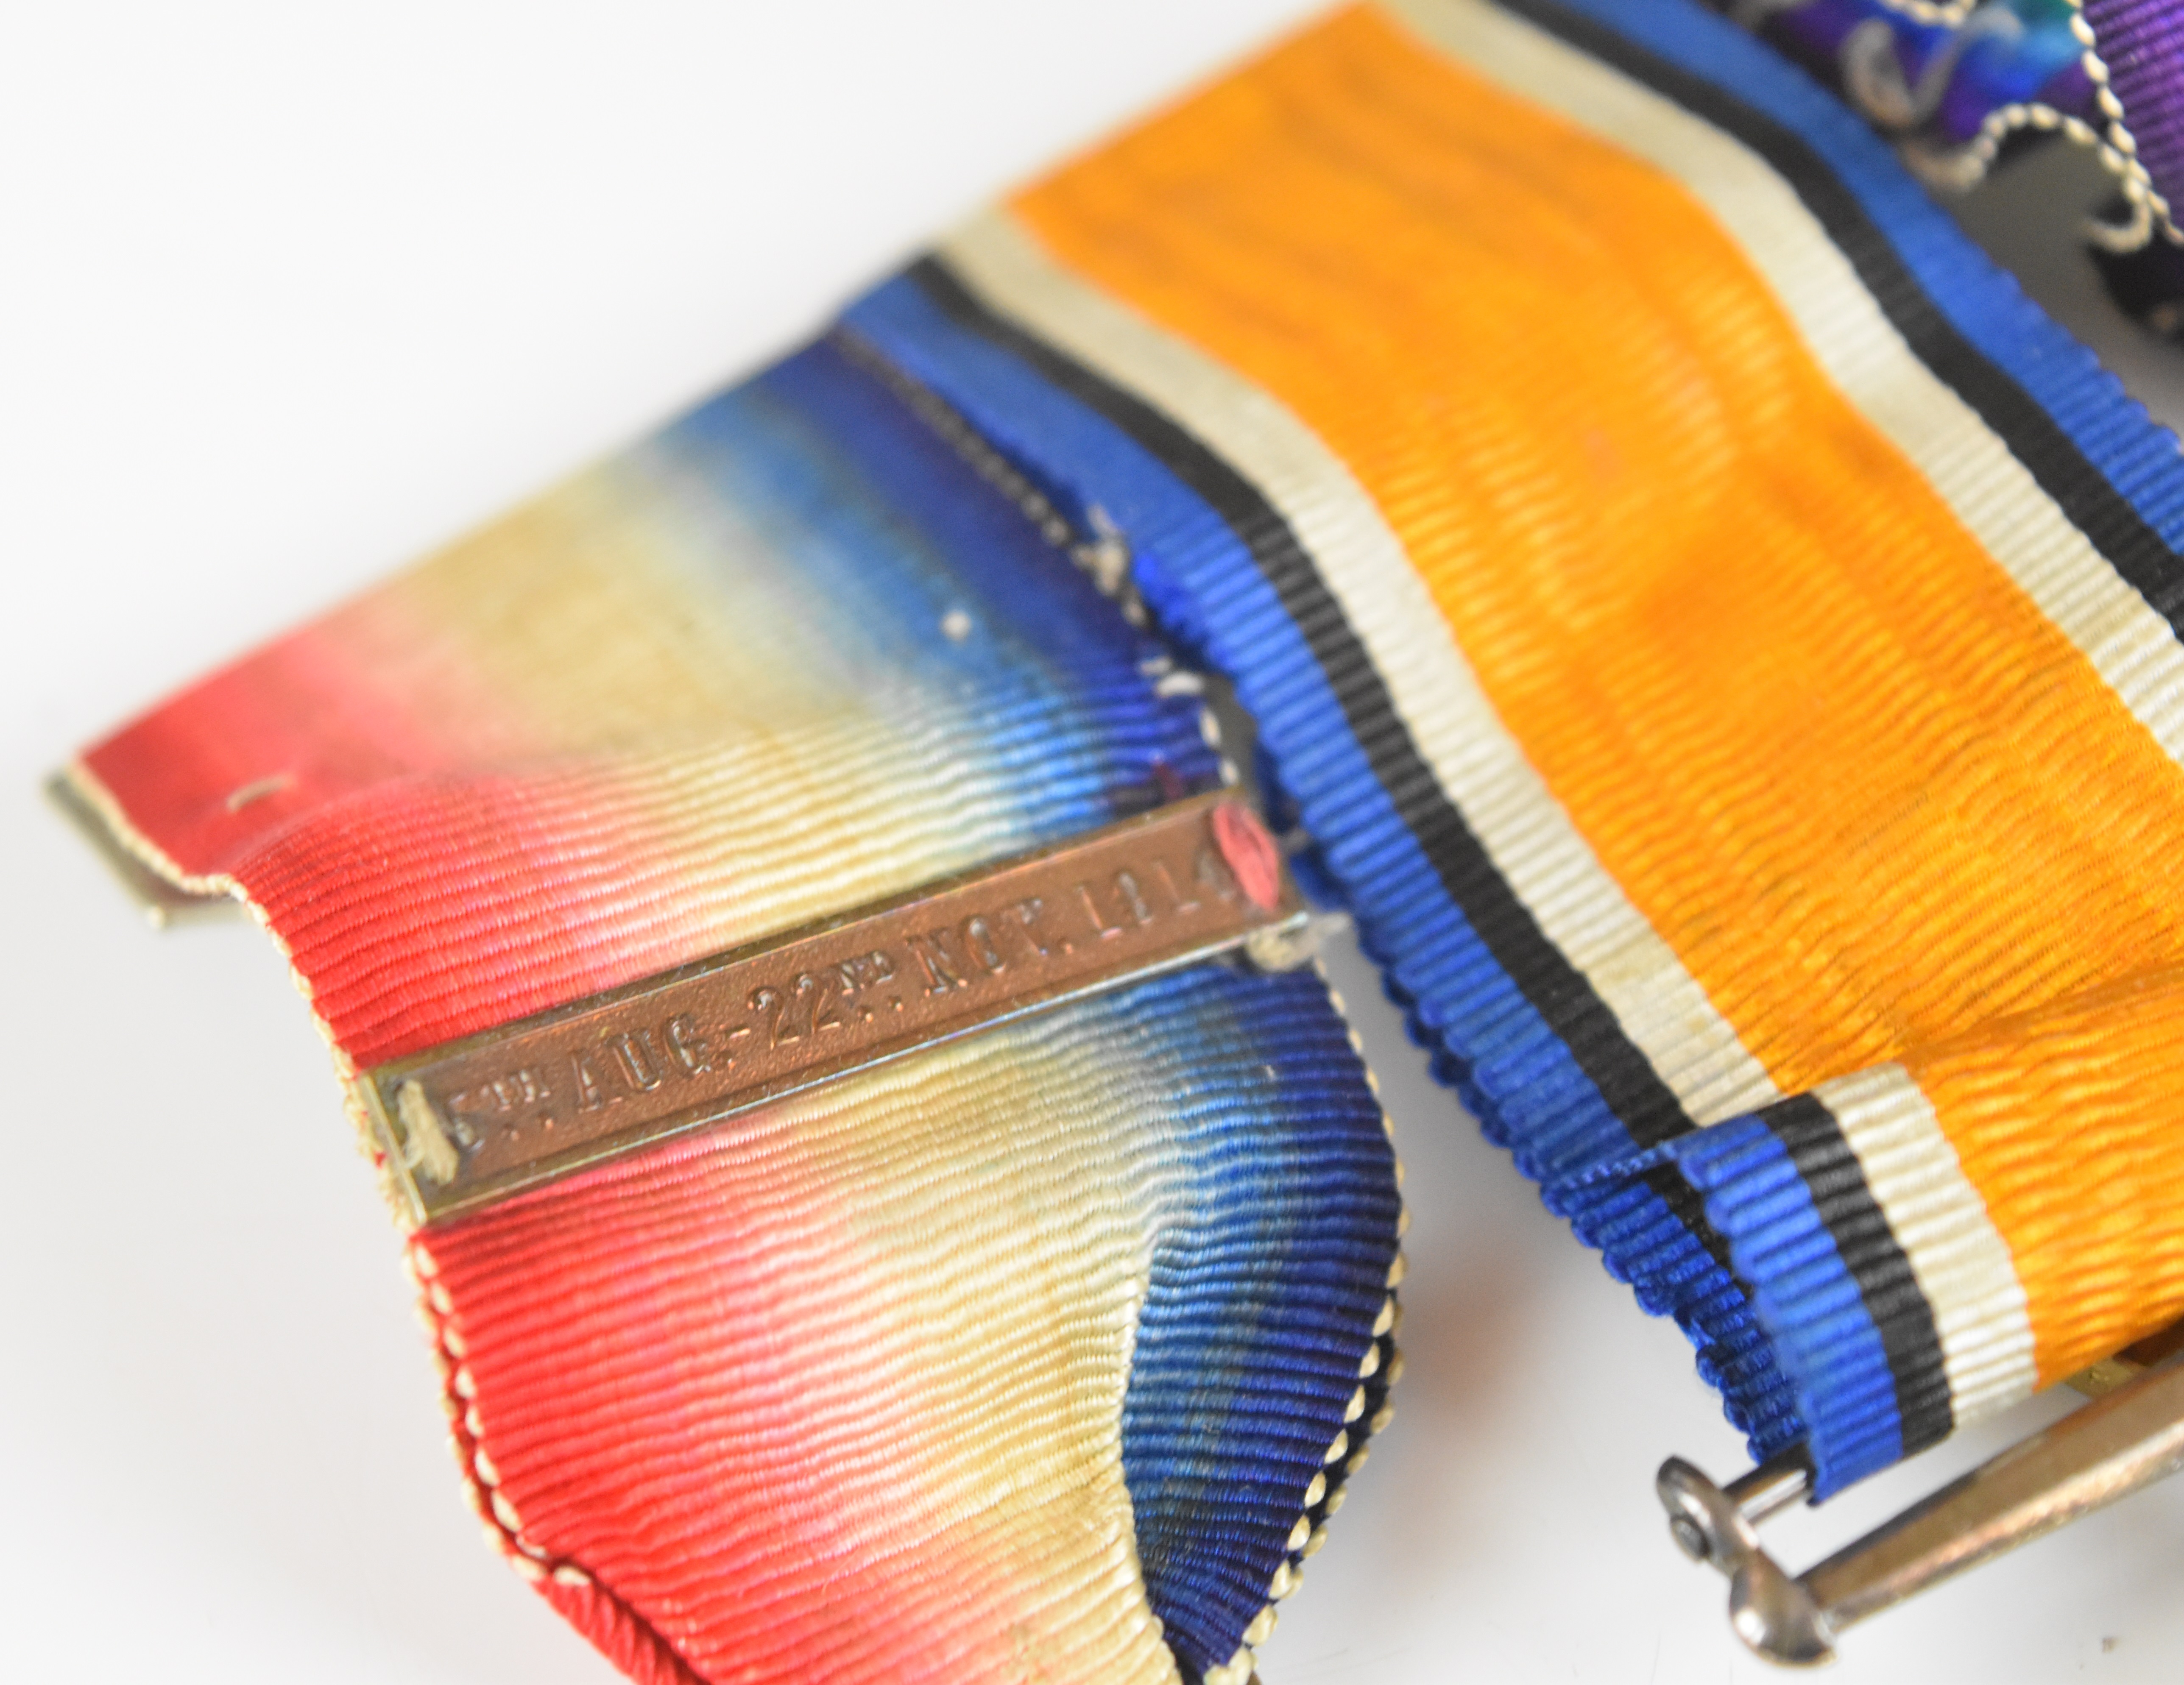 British Army WW1 11th Hussars medal trio comprising 1914 'Mons' Star with clasp for 5th August to - Image 9 of 13